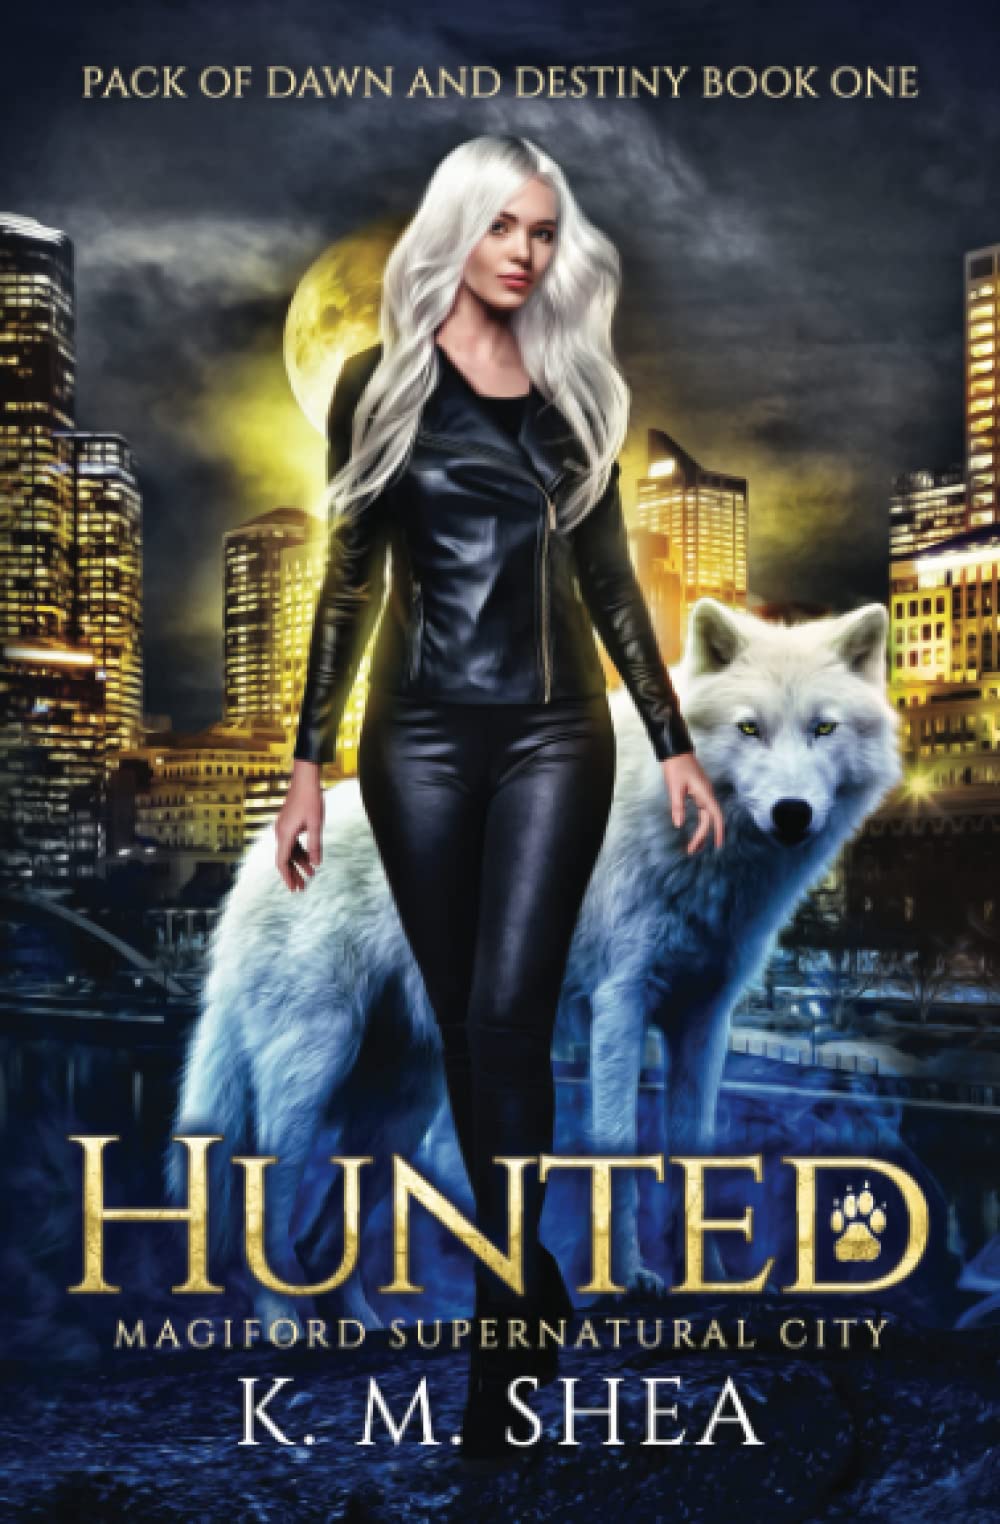 [EPUB] Pack of Dawn and Destiny #1 Hunted by K.M. Shea